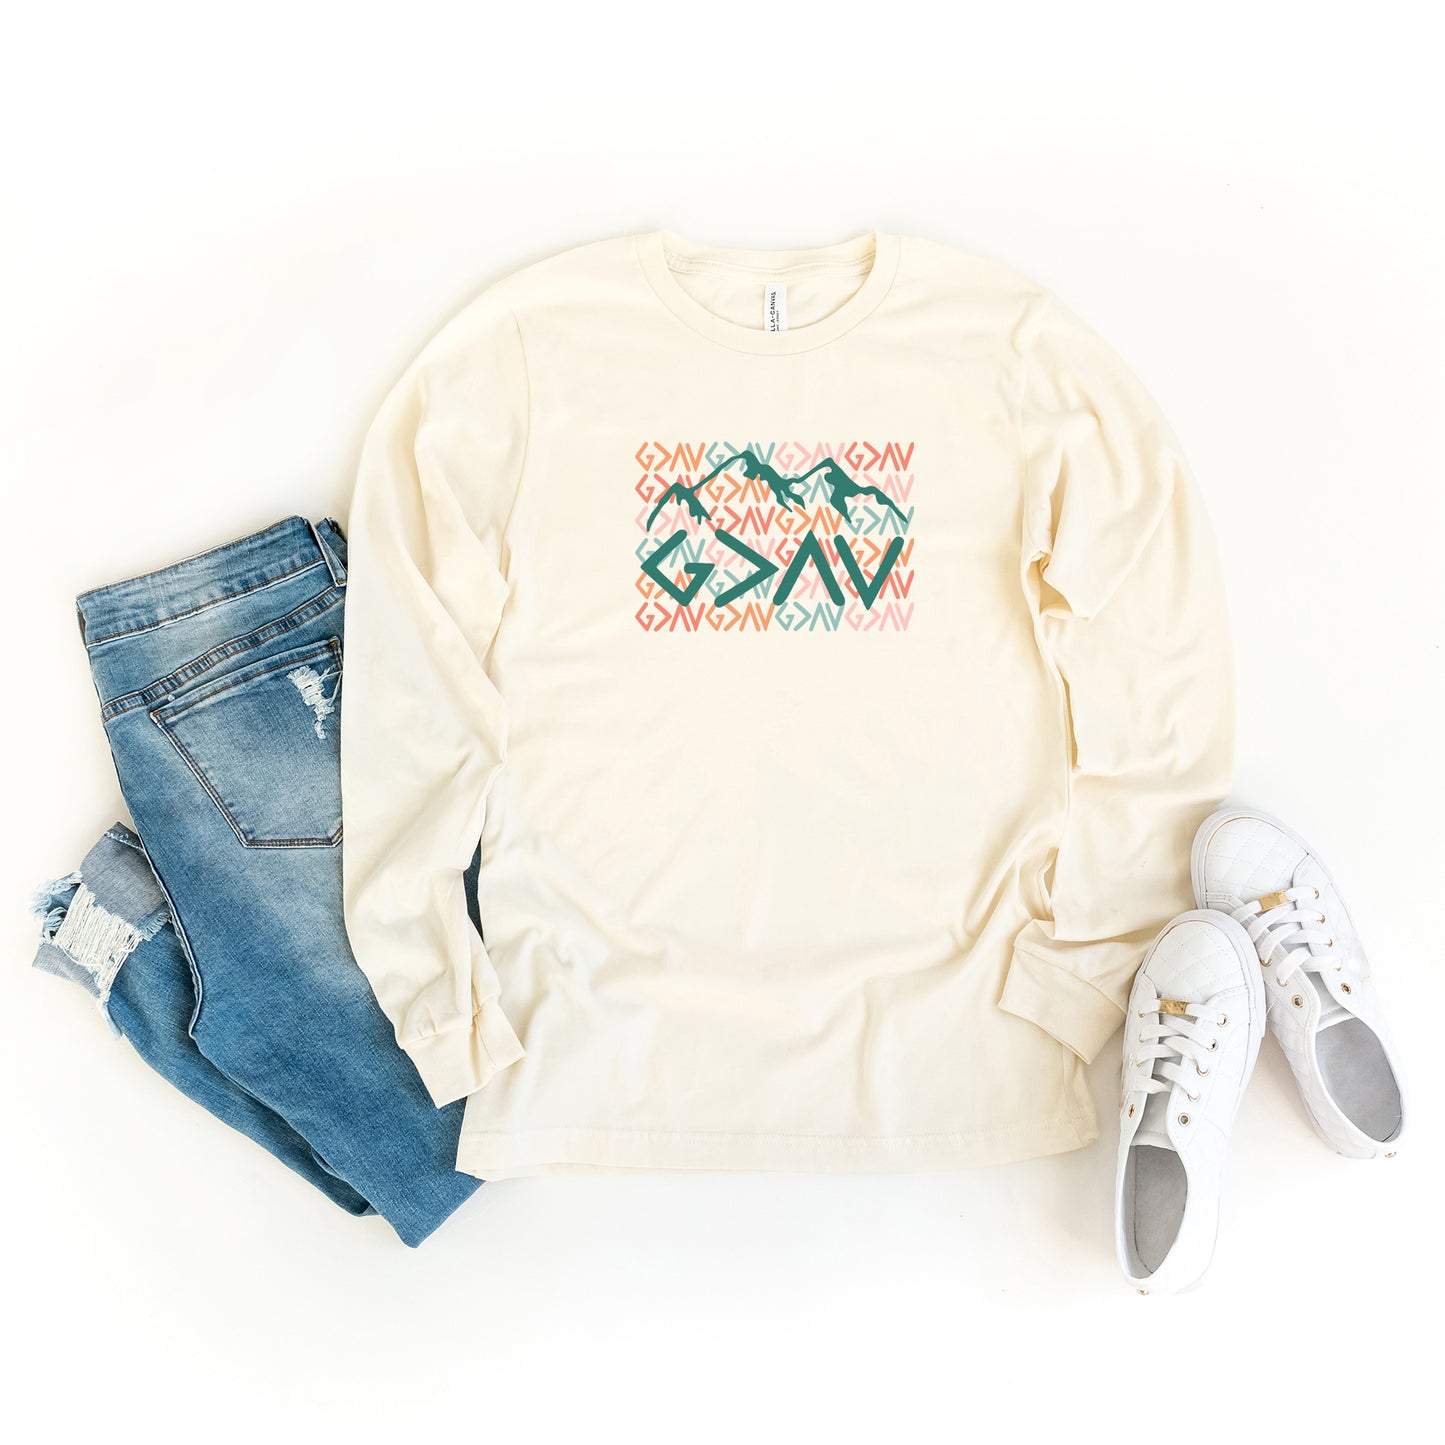 God Is Greater Mountains | Long Sleeve Crew Neck